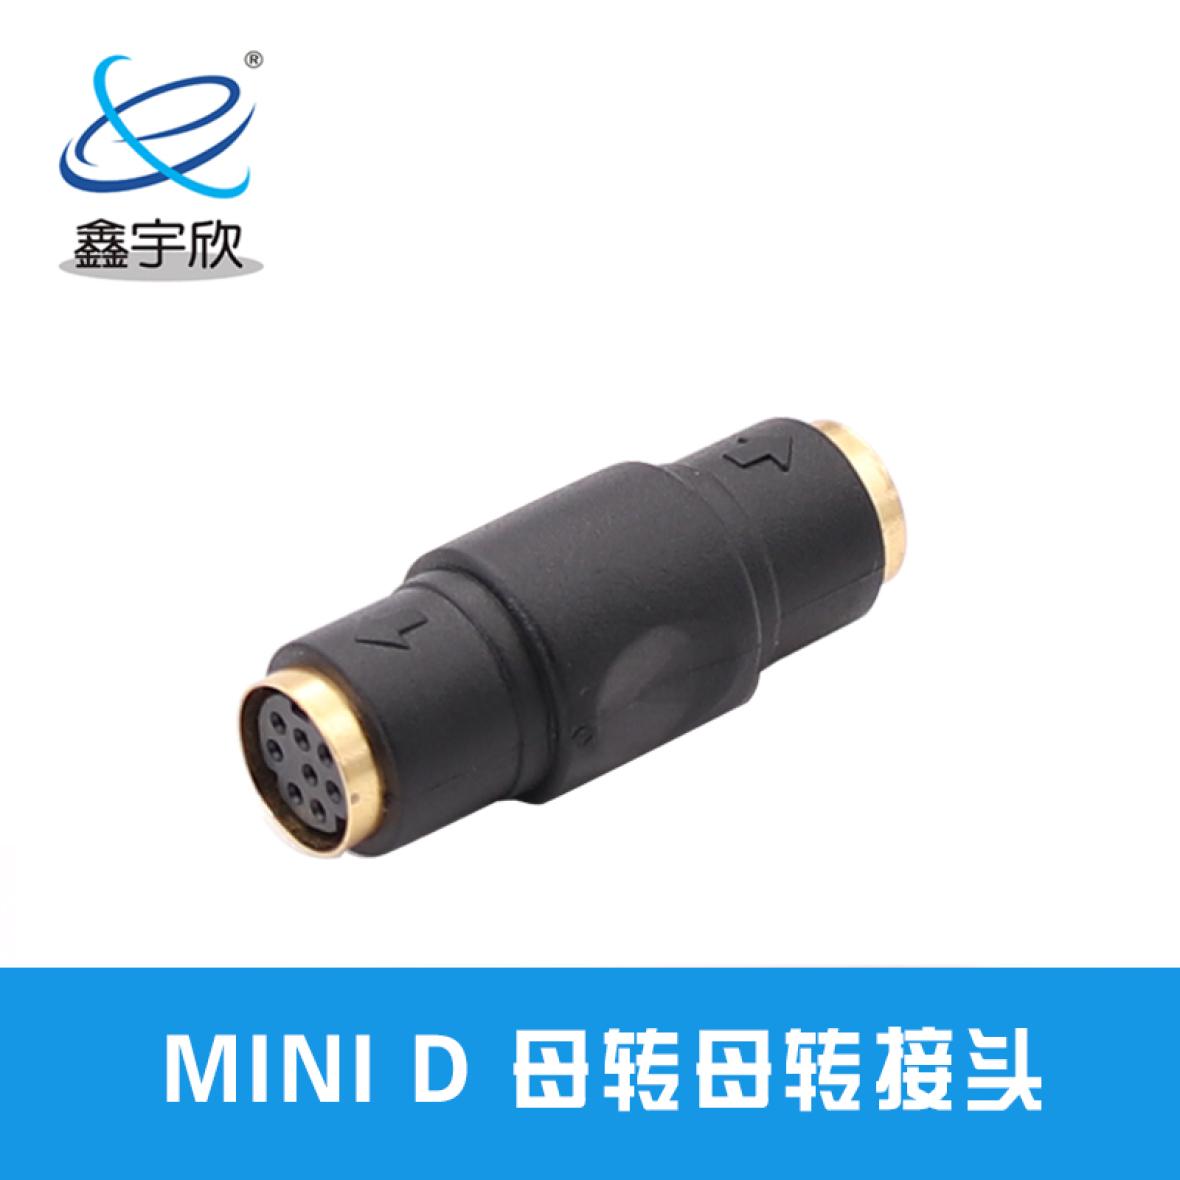  MINID (gold plated) female to female adapter